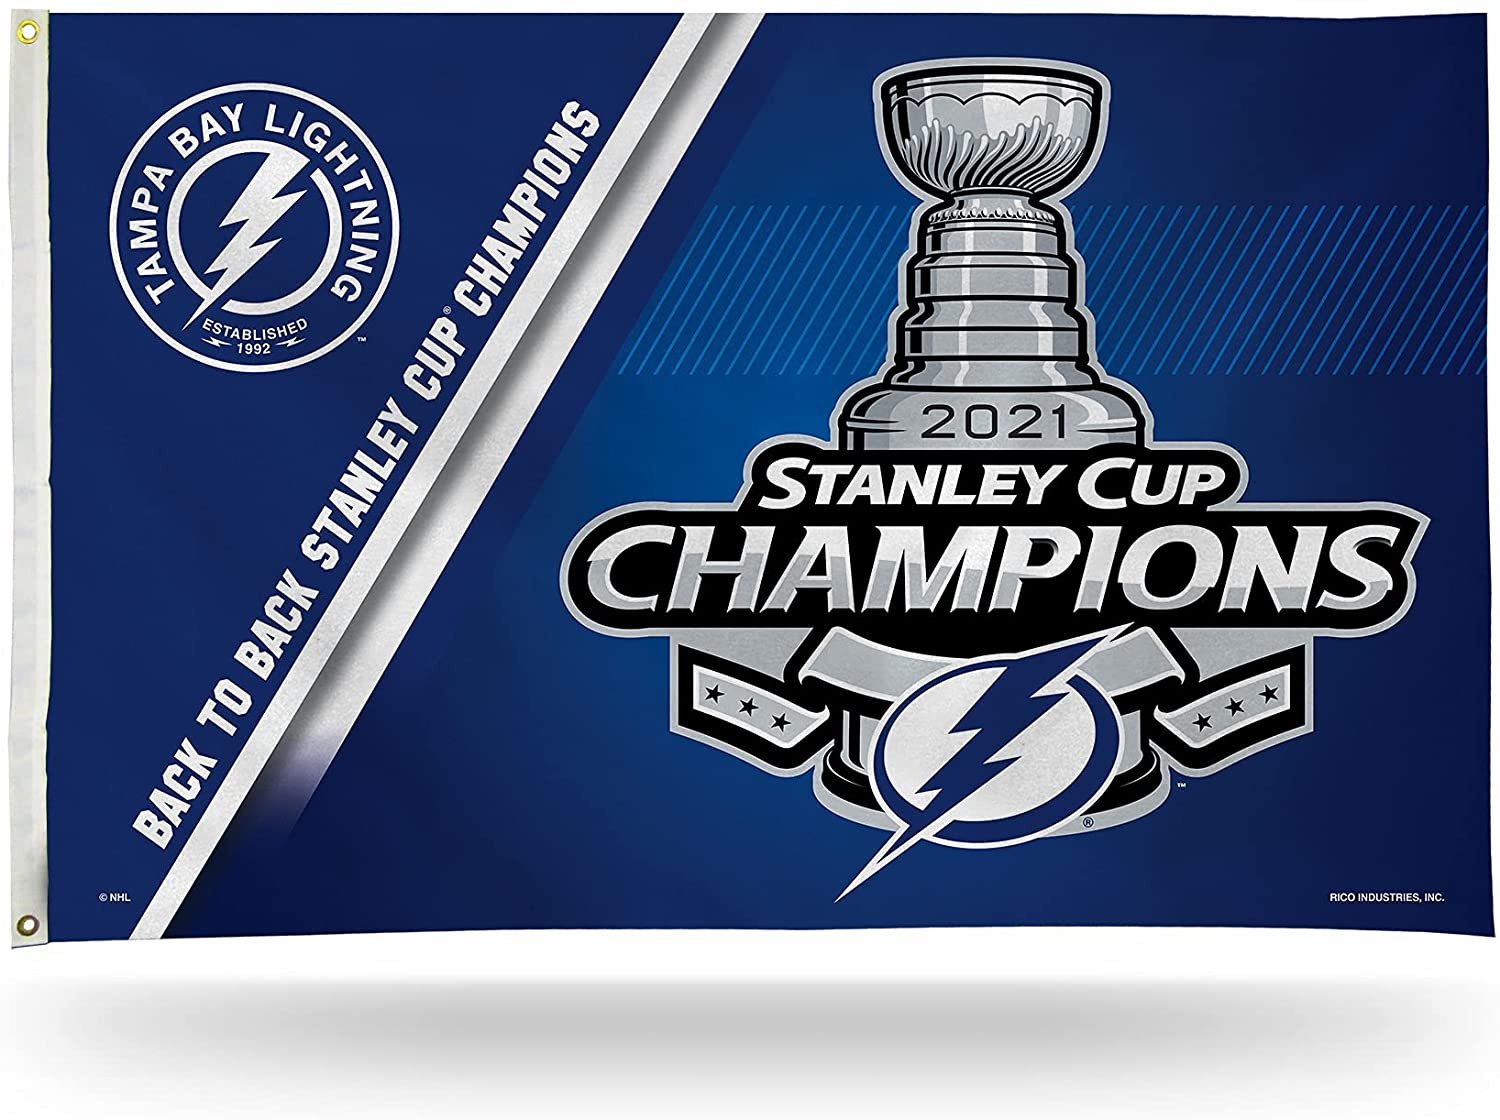 Tampa Bay Lightning 2021 Stanley Cup Champions Premium 3x5 Feet Flag Banner, Metal Grommets, Outdoor Use, Single Sided